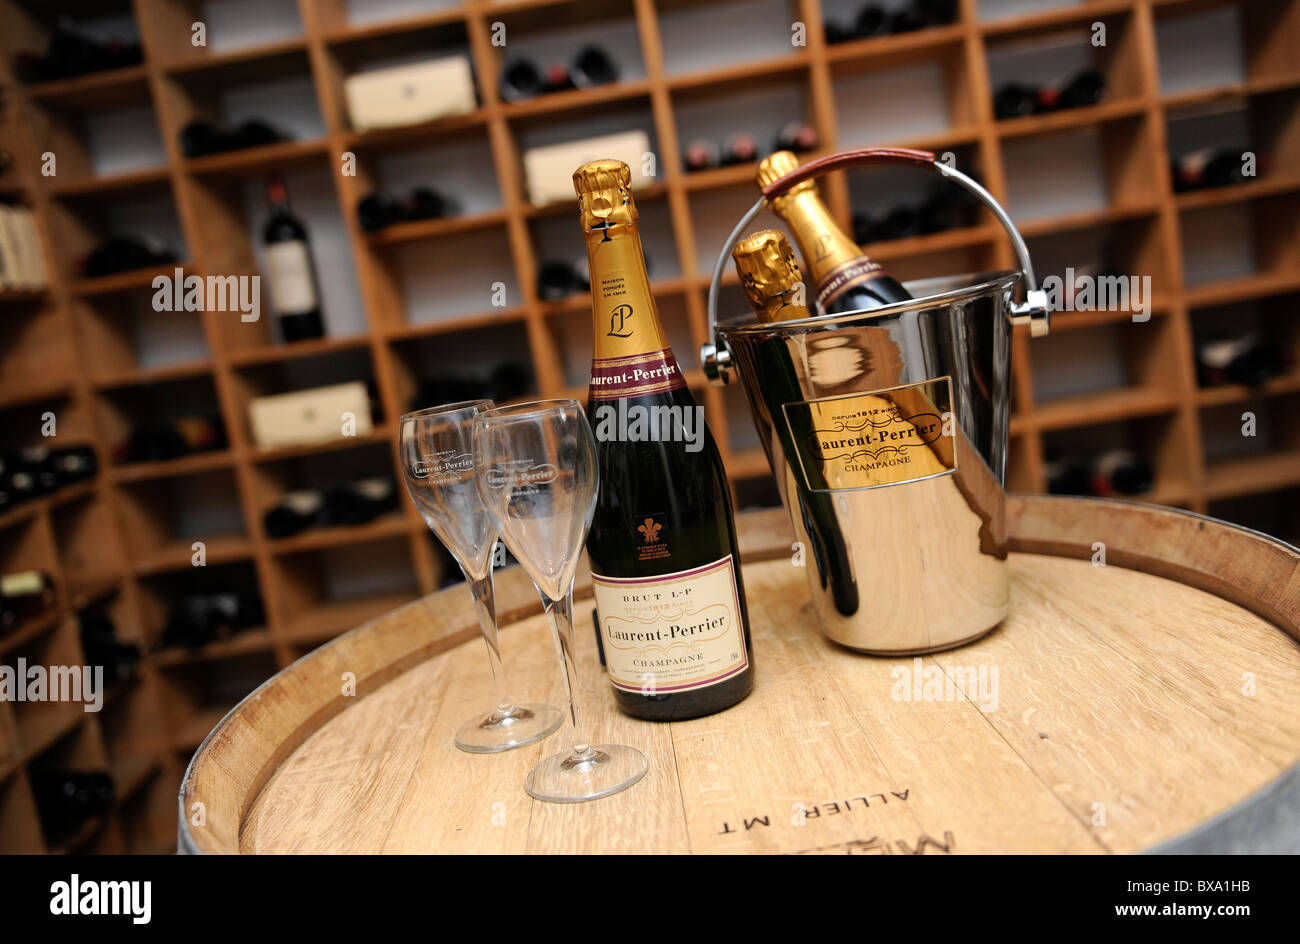 Bottles of Champagne with glasses and ice bucket ready for a taste. Stock Photo